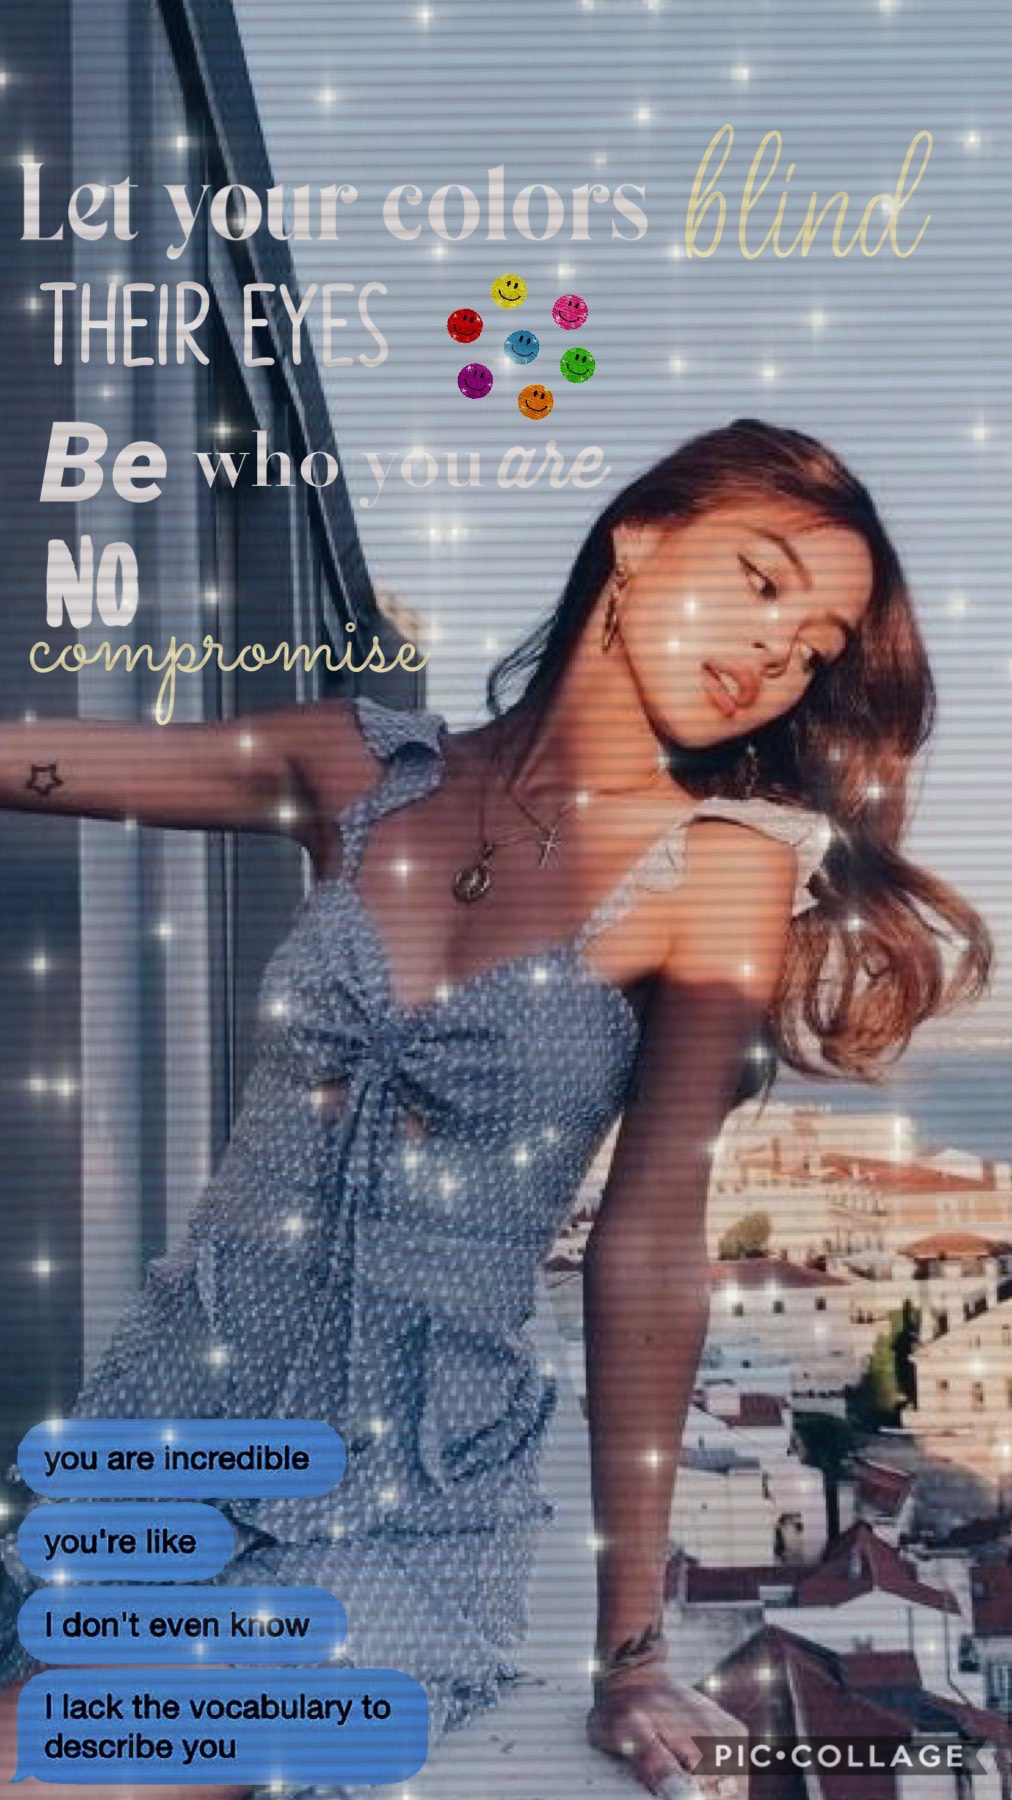 🌞 1.7.21 🌞
Tehe I like how this turned out x
It's a lyric from "Edge of Great" 🙃
Pls rate!
Love you! 🌞💕✨